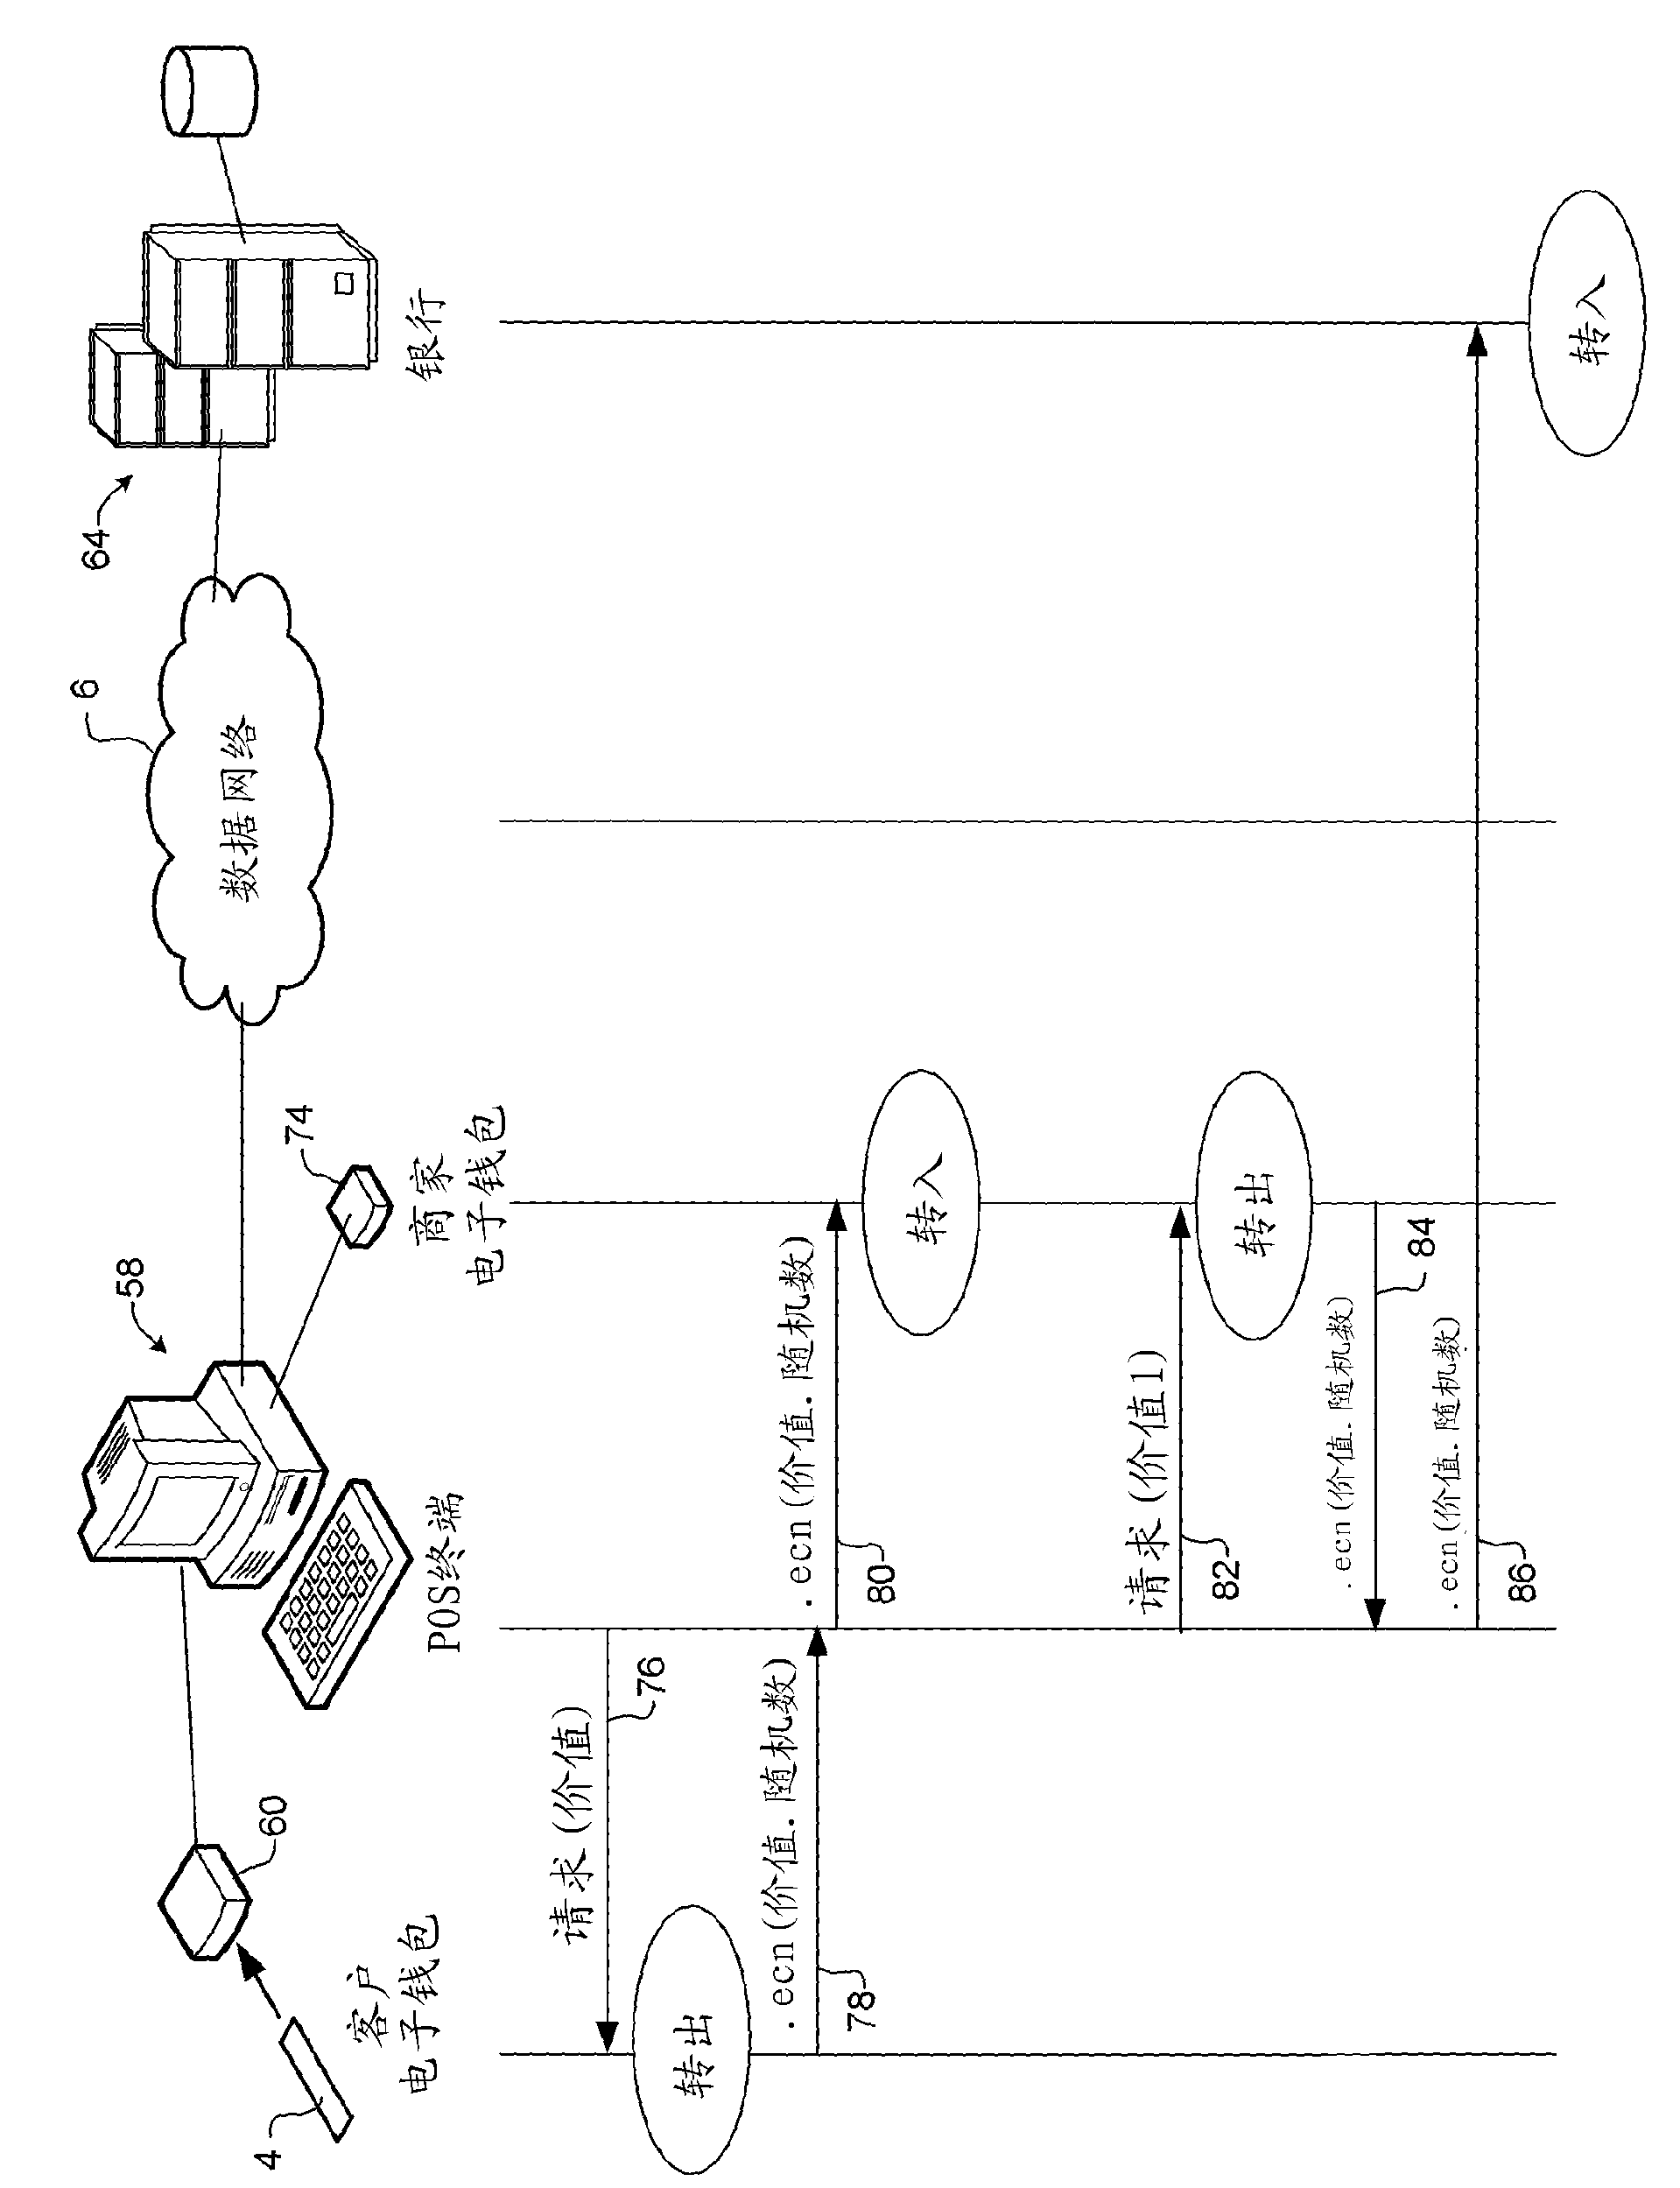 Asset storage and transfer system for electronic purses